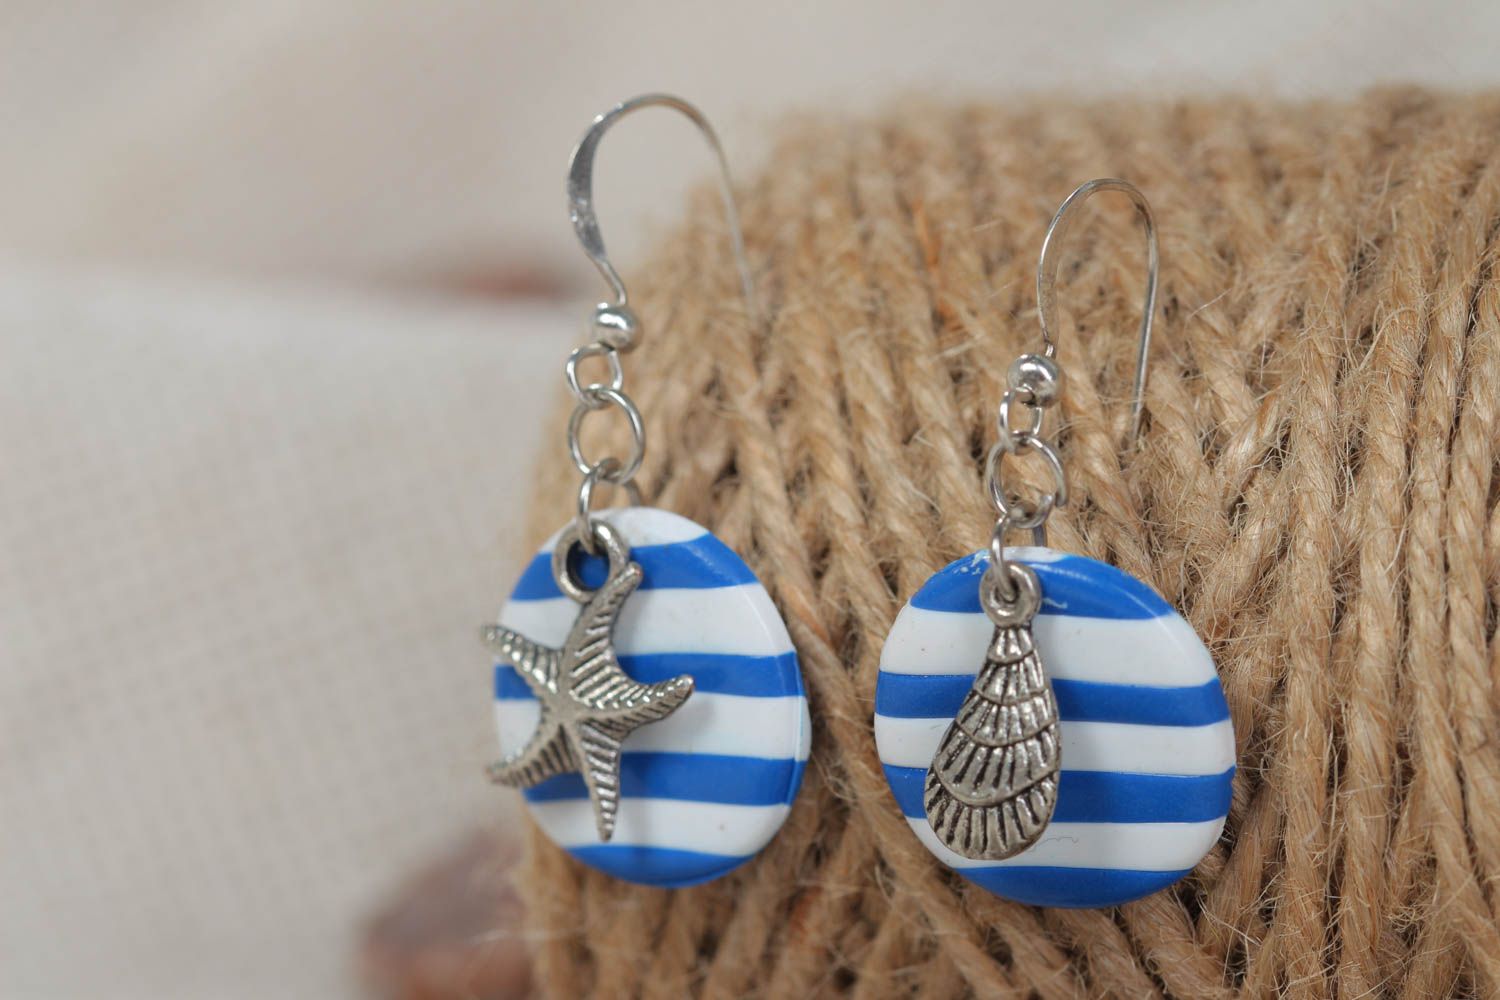 Beautiful handmade polymer clay earrings plastic jewelry designs gifts for her photo 1